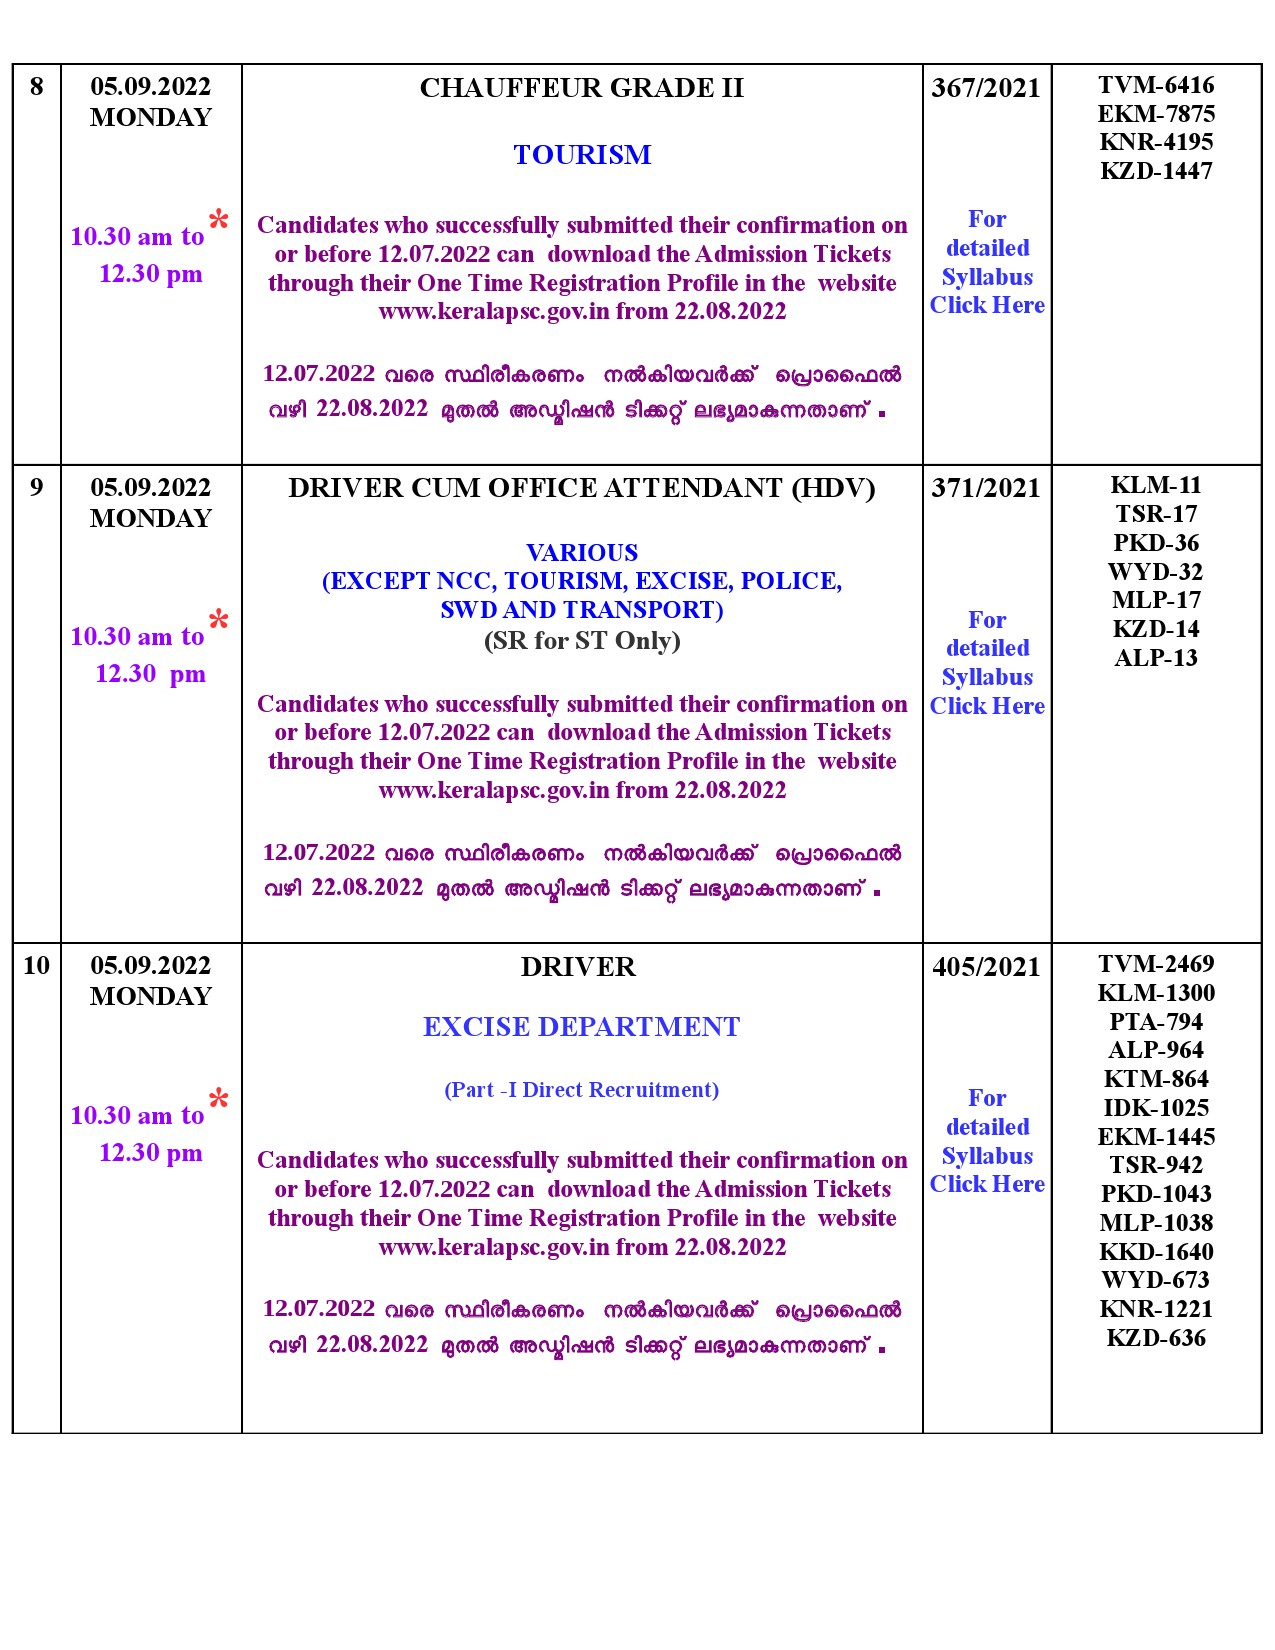 KPSC Modified Exam For The Month Of September 2022 - Notification Image 5